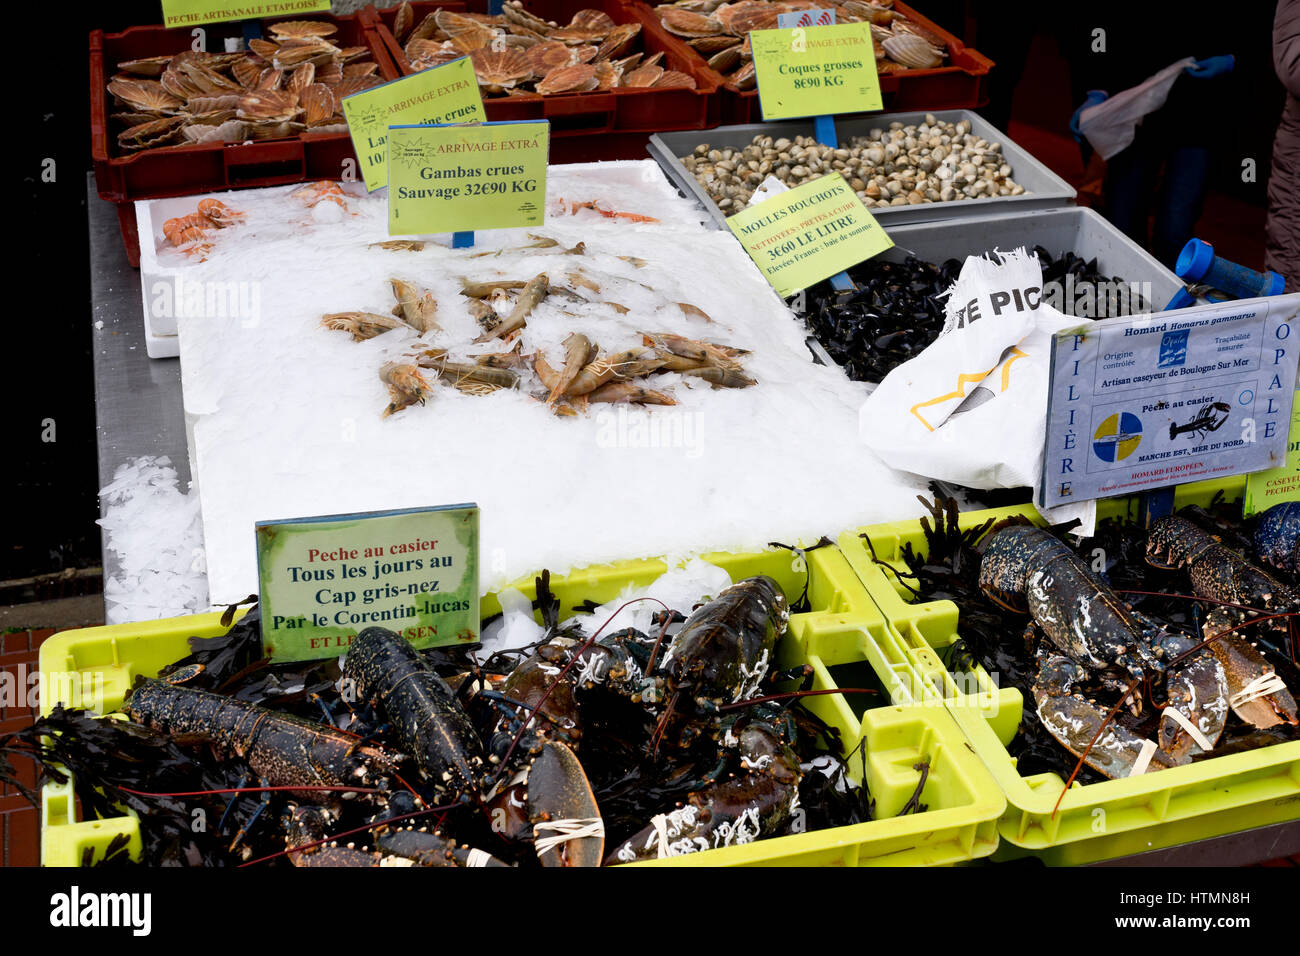 great offer of seafood in a fish shop at  Le Touquet-Plage, France Stock Photo